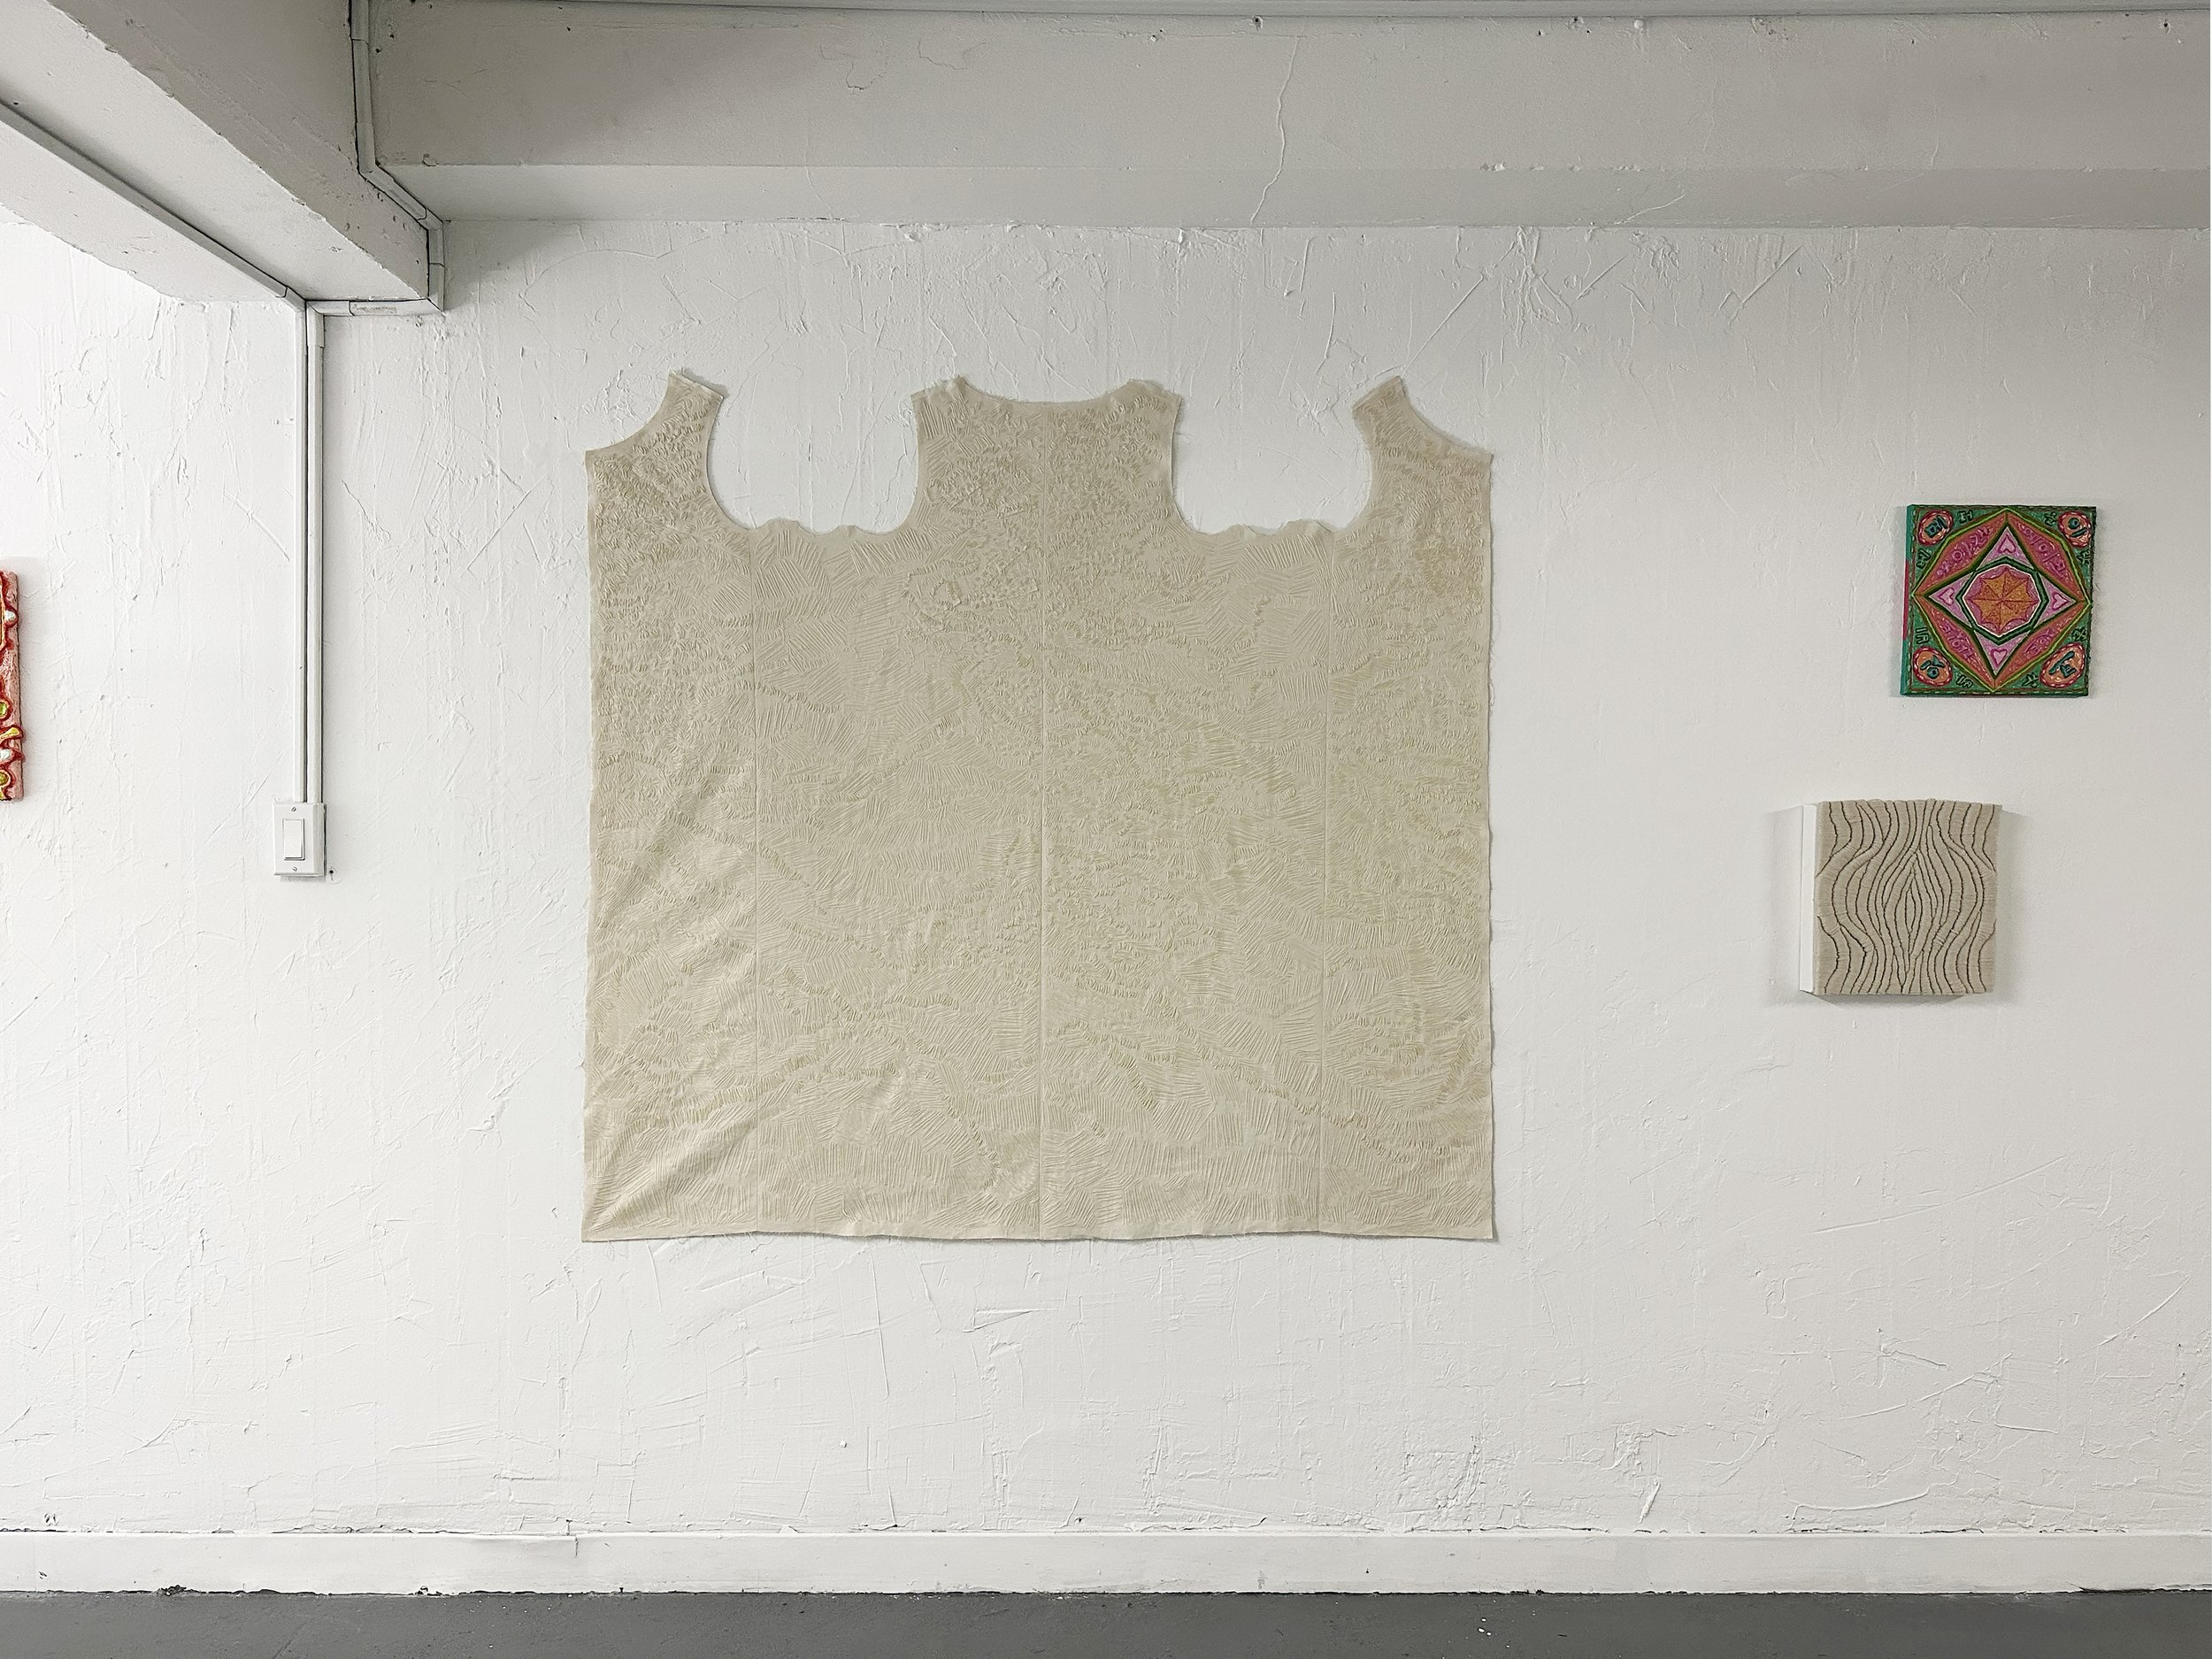  Untitled, 2019.  Fabric and embroidery thread. 60 x 77 in 